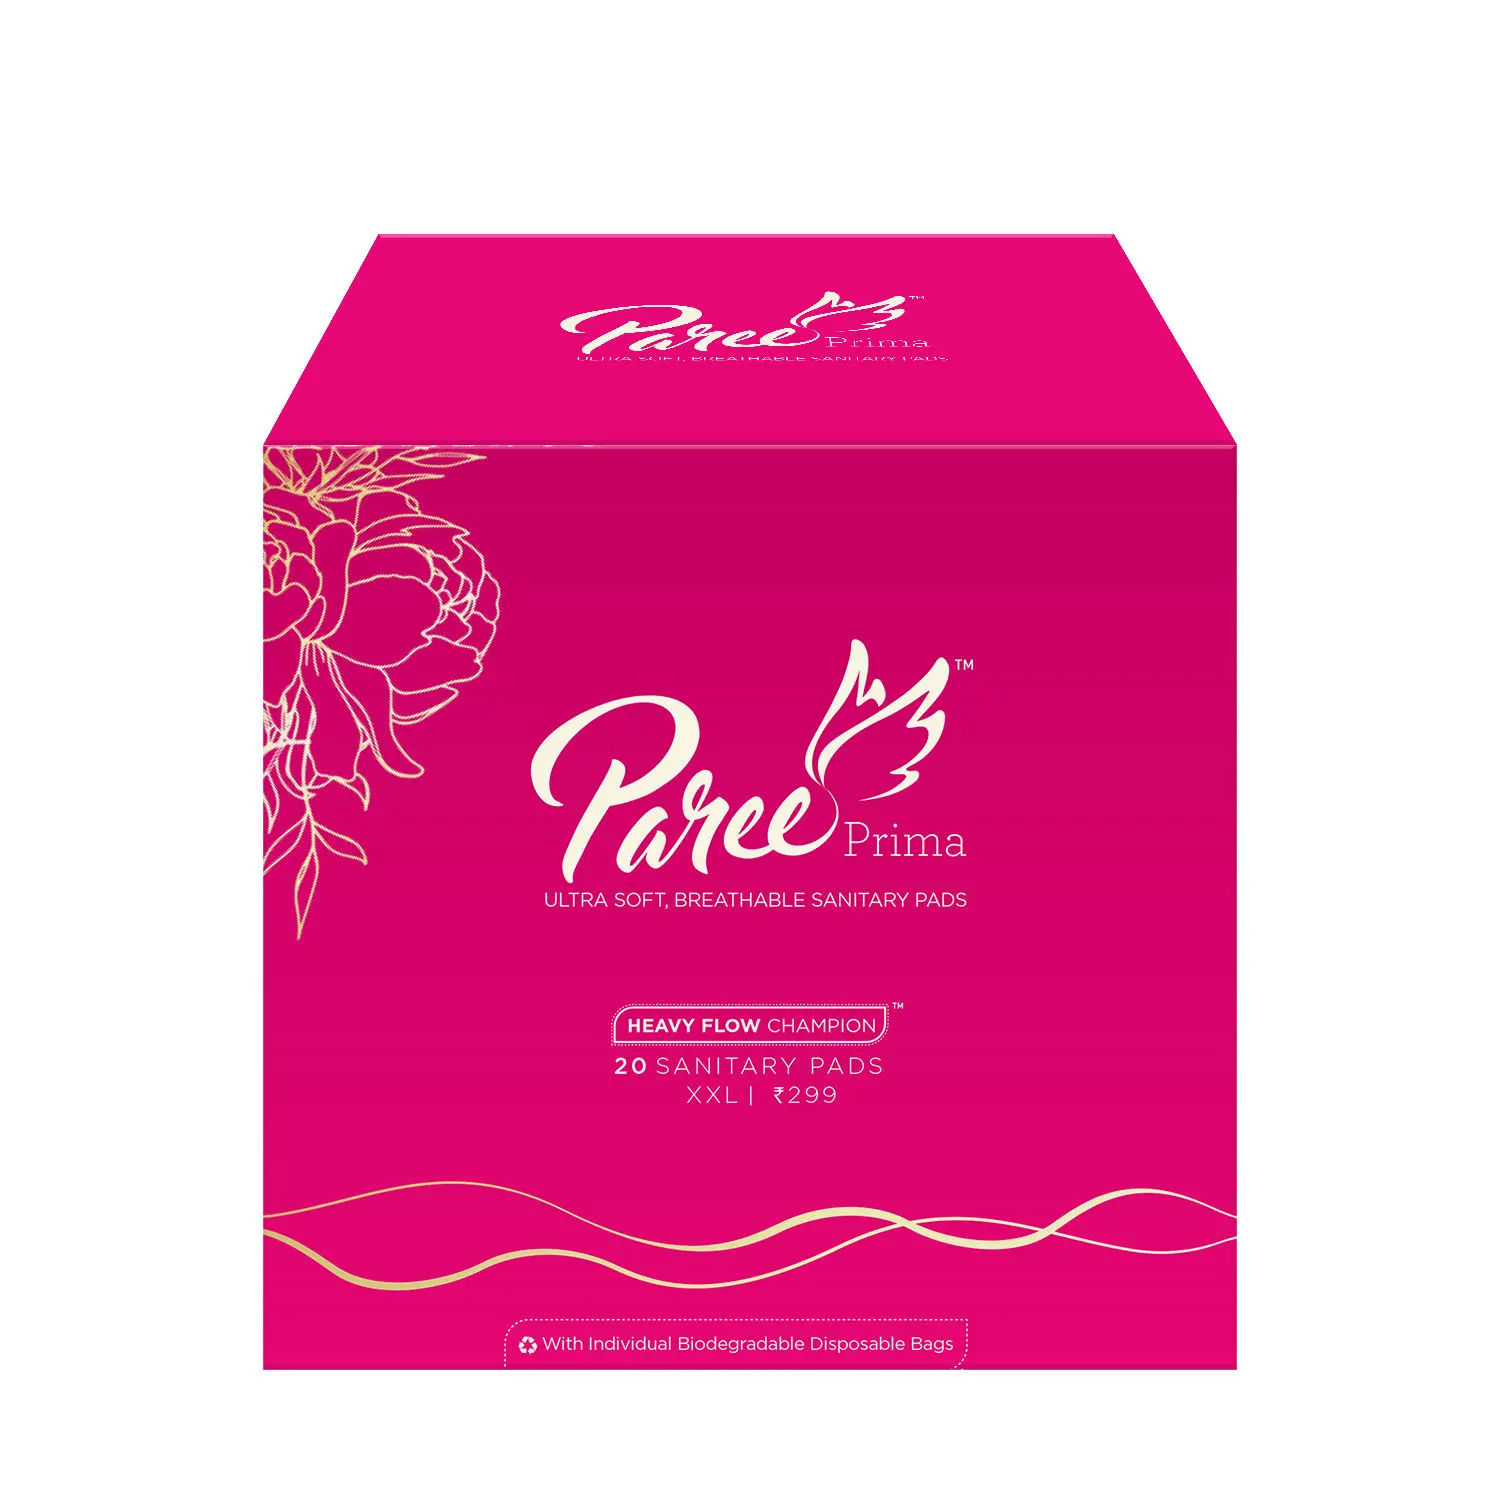 Paree Prima Premium Ultra Soft Sanitary Pads for Women with Breathable Back Sheet And Super Soft Top Sheet for Heavy Flow, XXL| Biodegradable Disposable Bags, 20 Pads